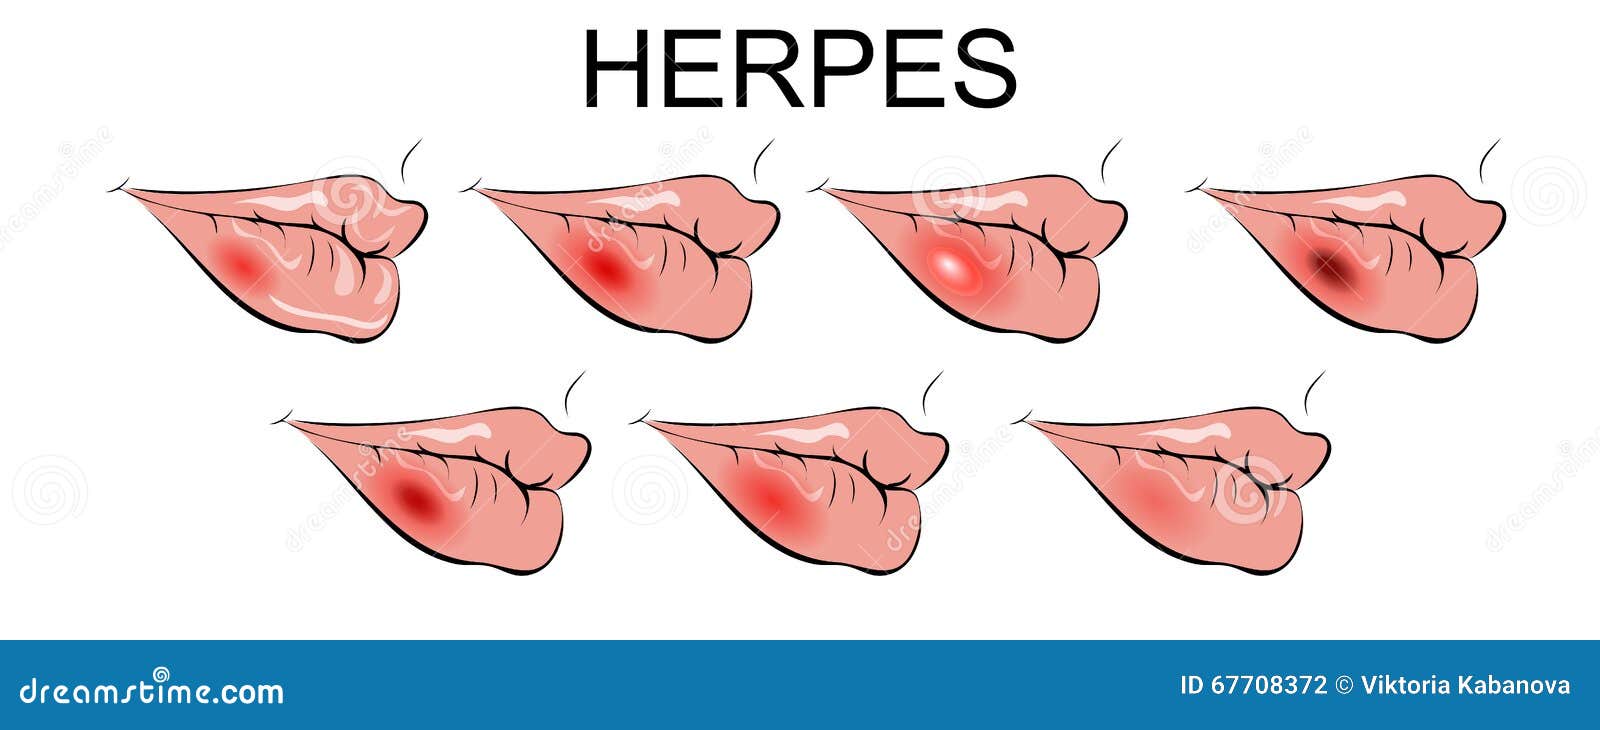 Herpes Pictures & Symptoms of Herpes Simplex - Live Science